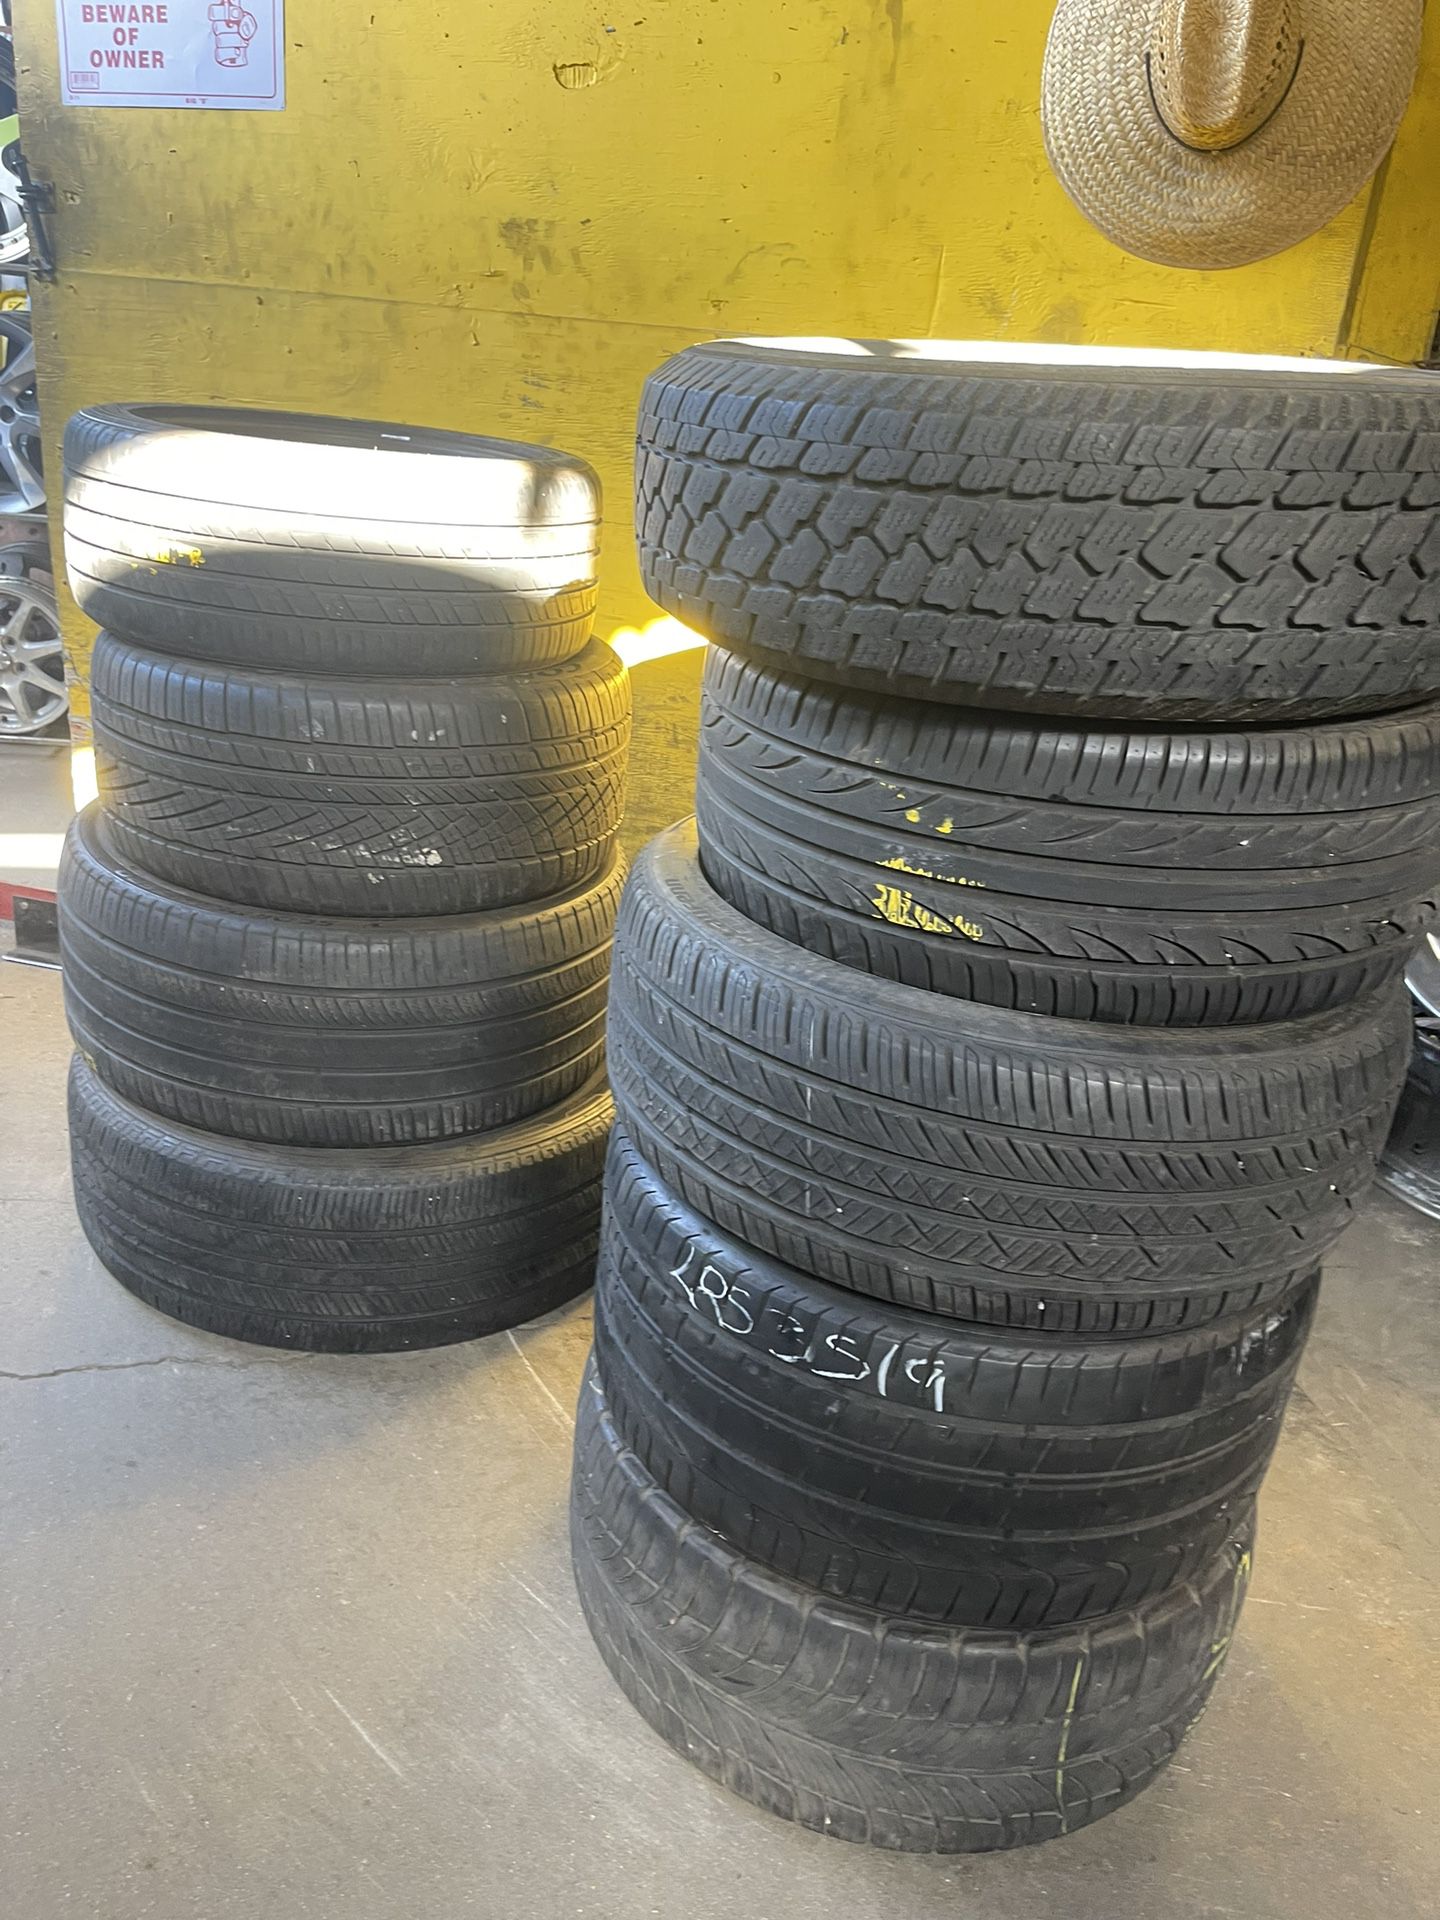 NEW & USED TIRES 